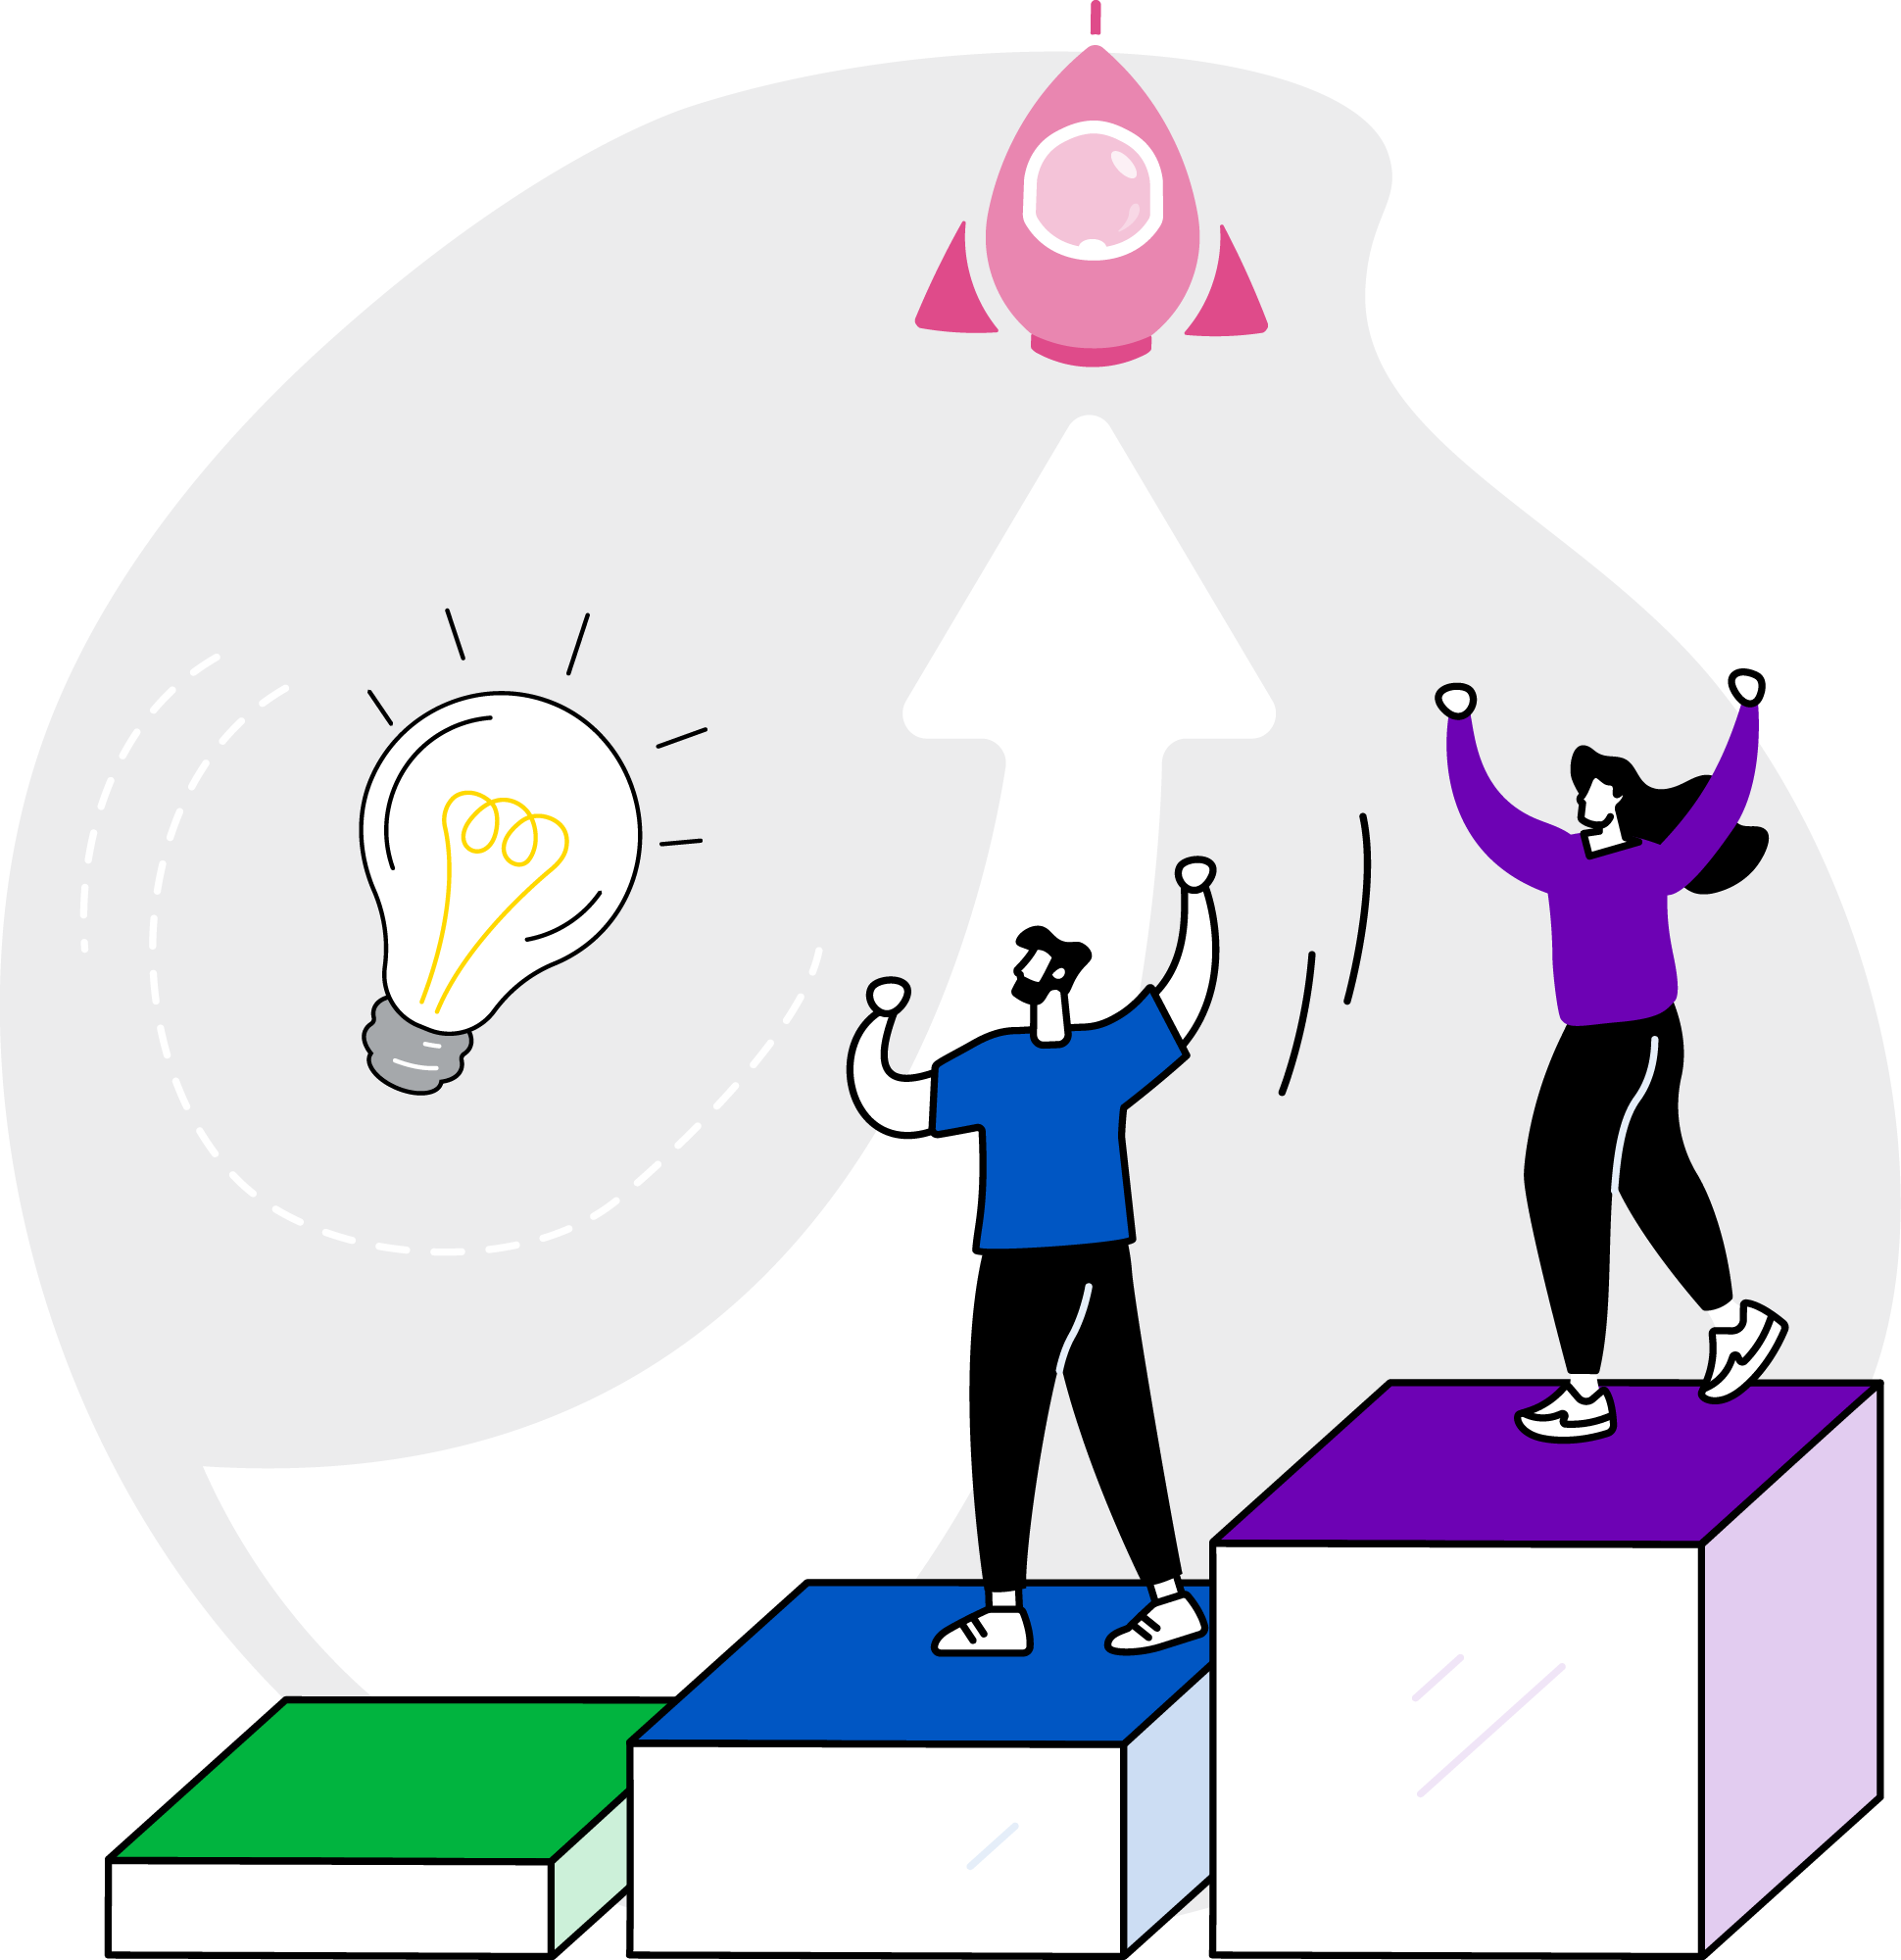 A colorful 2D illustration of two people cheering atop green, blue, and purple stepped platforms that look like a growing profit graph. They're looking up at a cute chubby pink rocketship that's launching into the stratosphere!